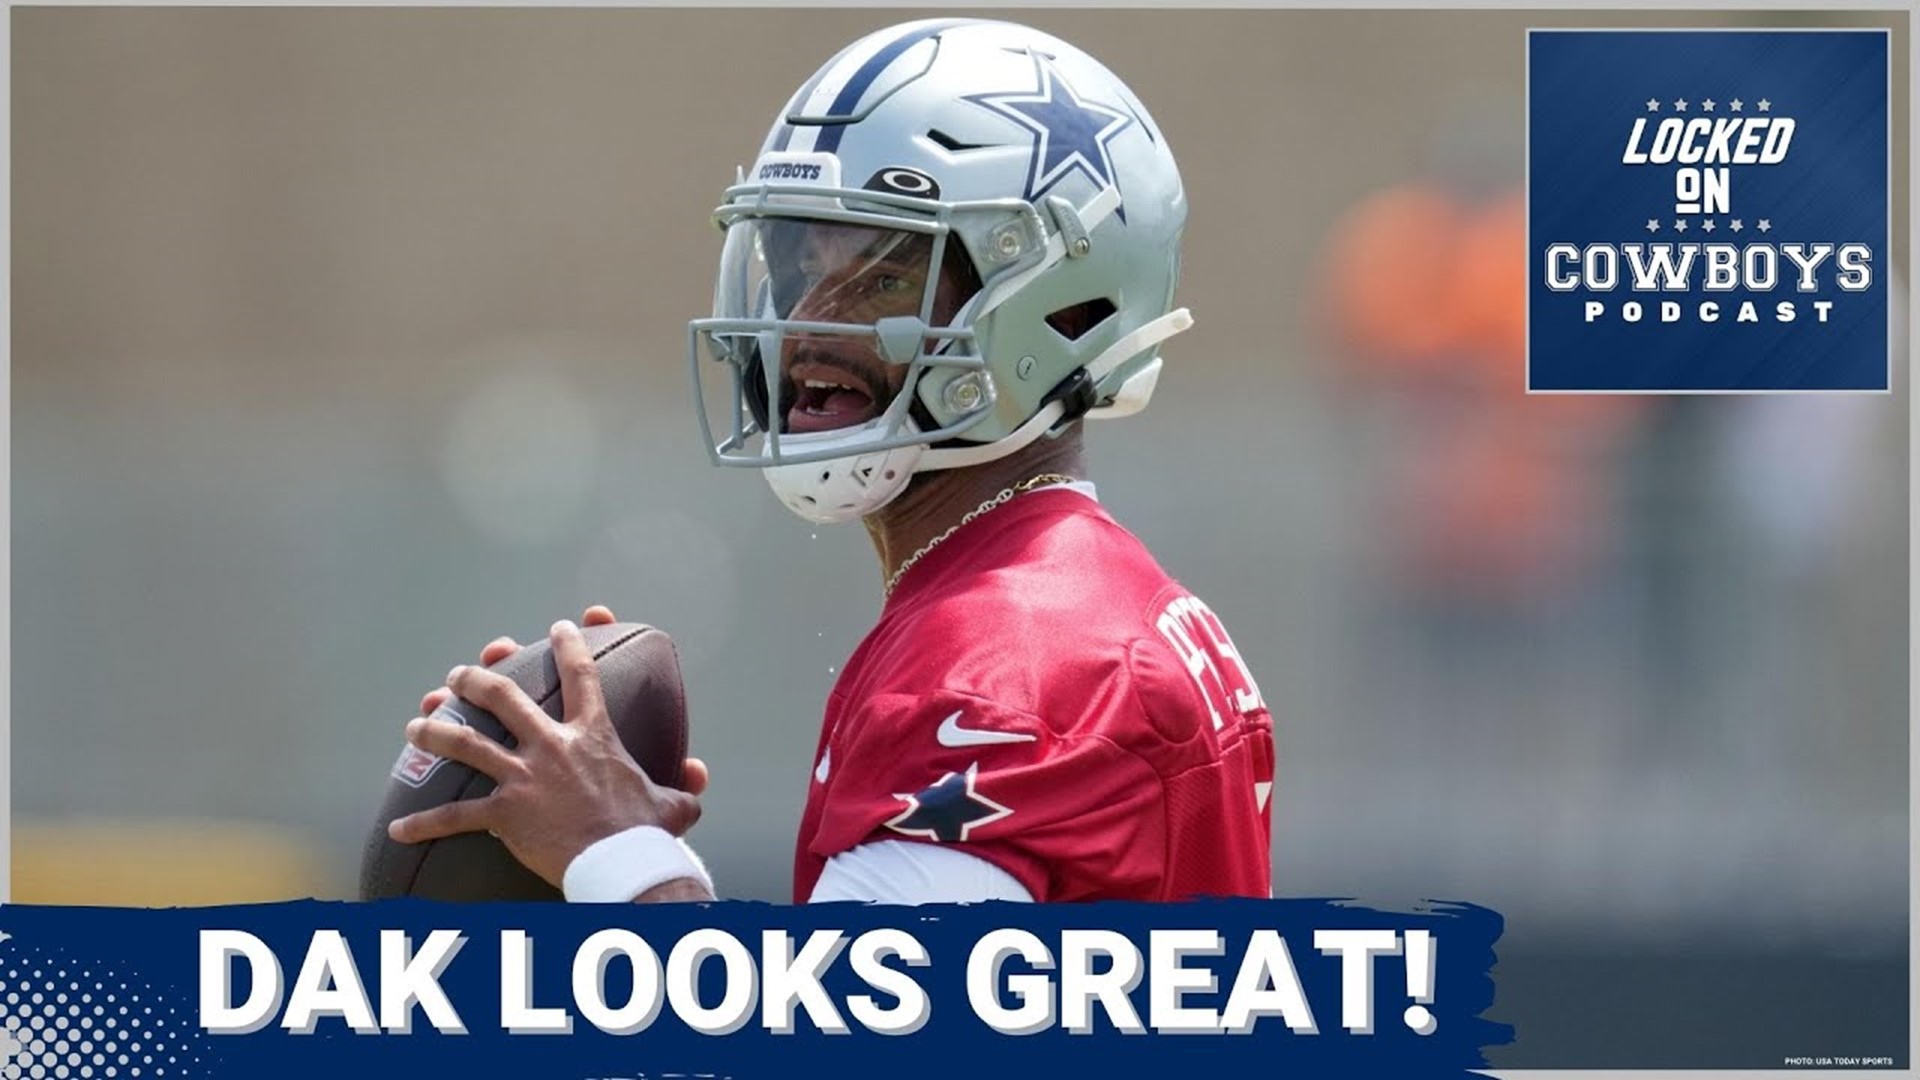 How has Dallas Cowboys QB Dak Prescott performed in training camp so far? And how has his chemistry been with the receivers in practice?